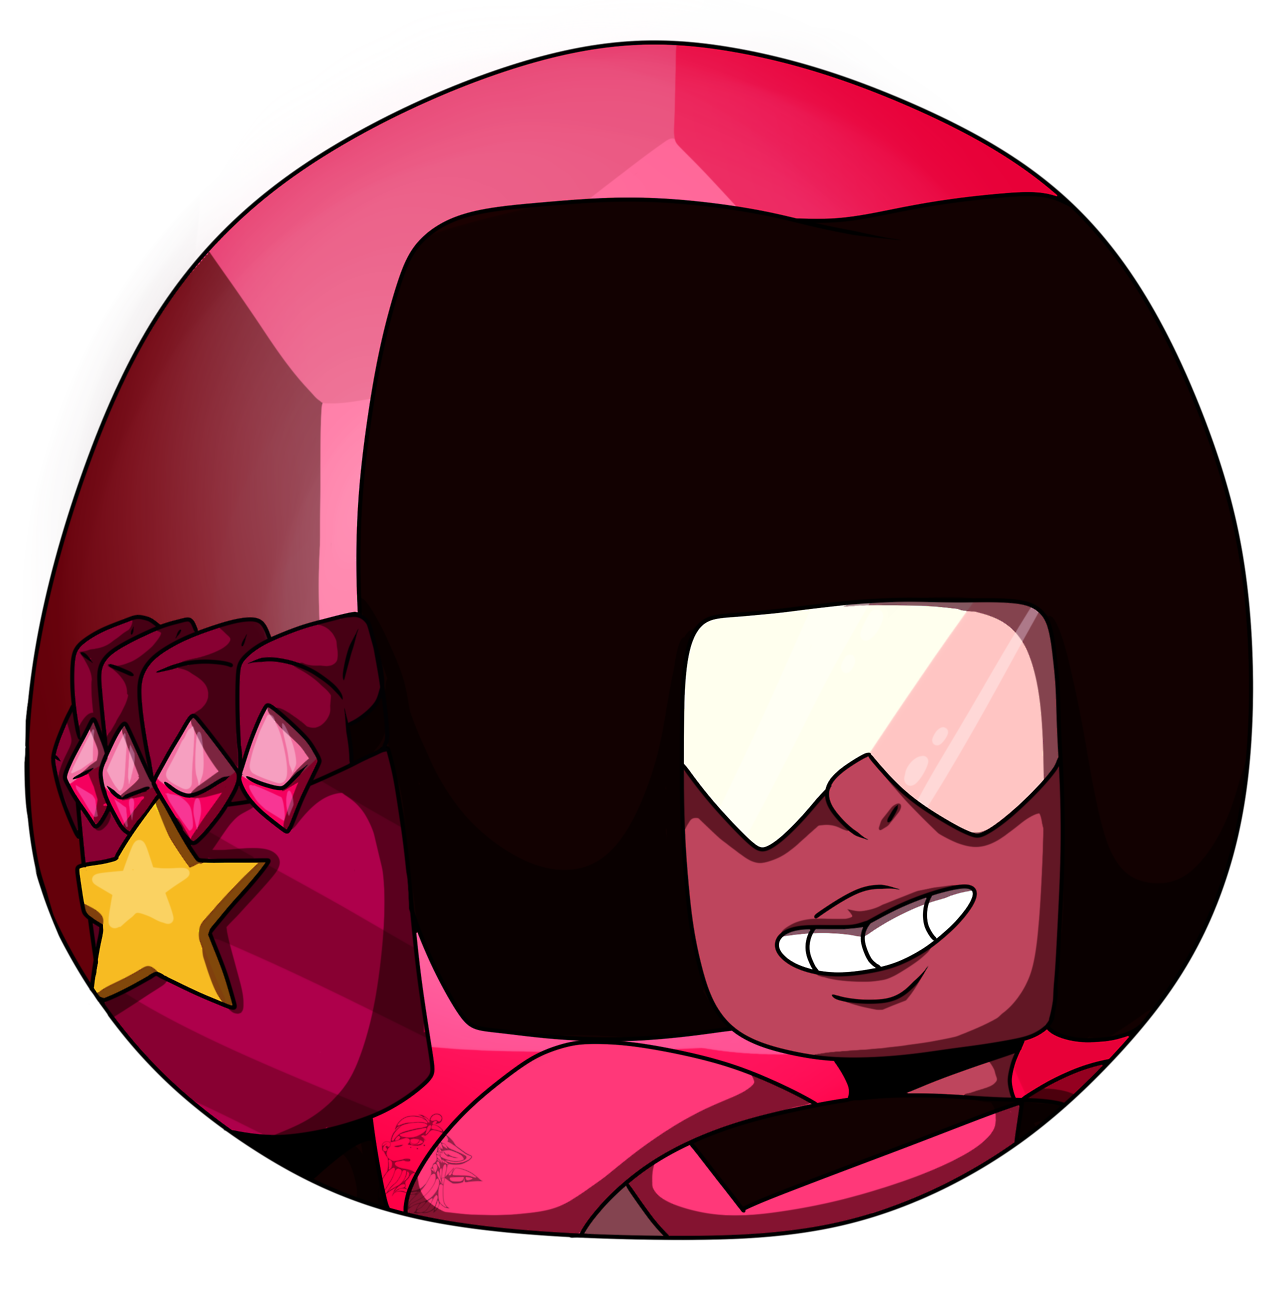 Spent some time doodling up some Steven Universe arts for the upcoming conventions!! Will be sold as prints - shirts - keychains - stickers and possibly buttons!